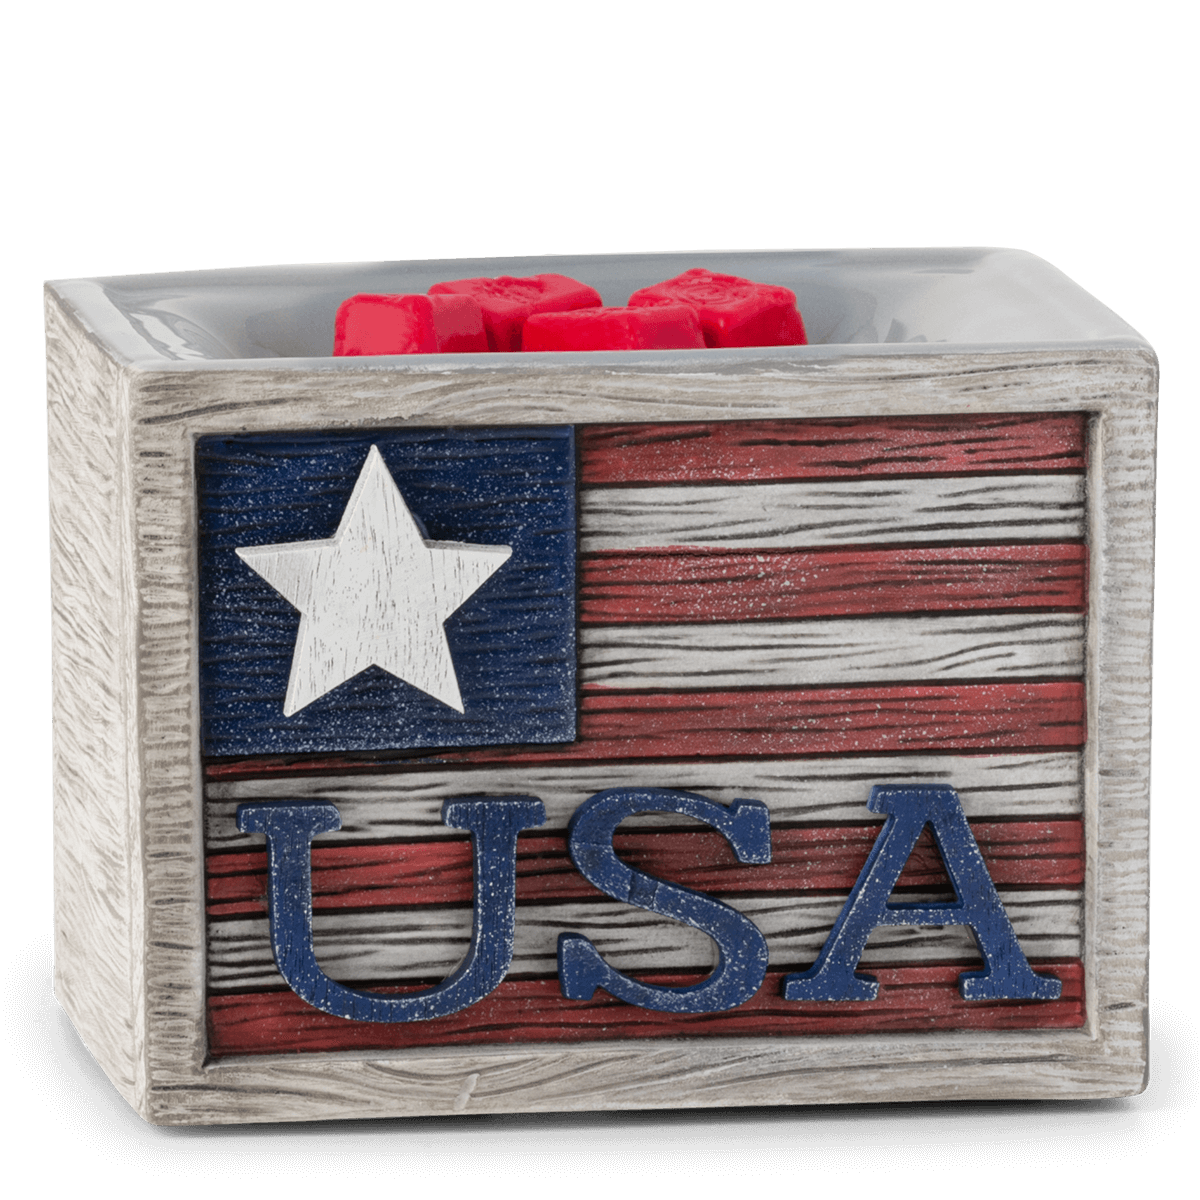 let freedom ring Scentsy warmer